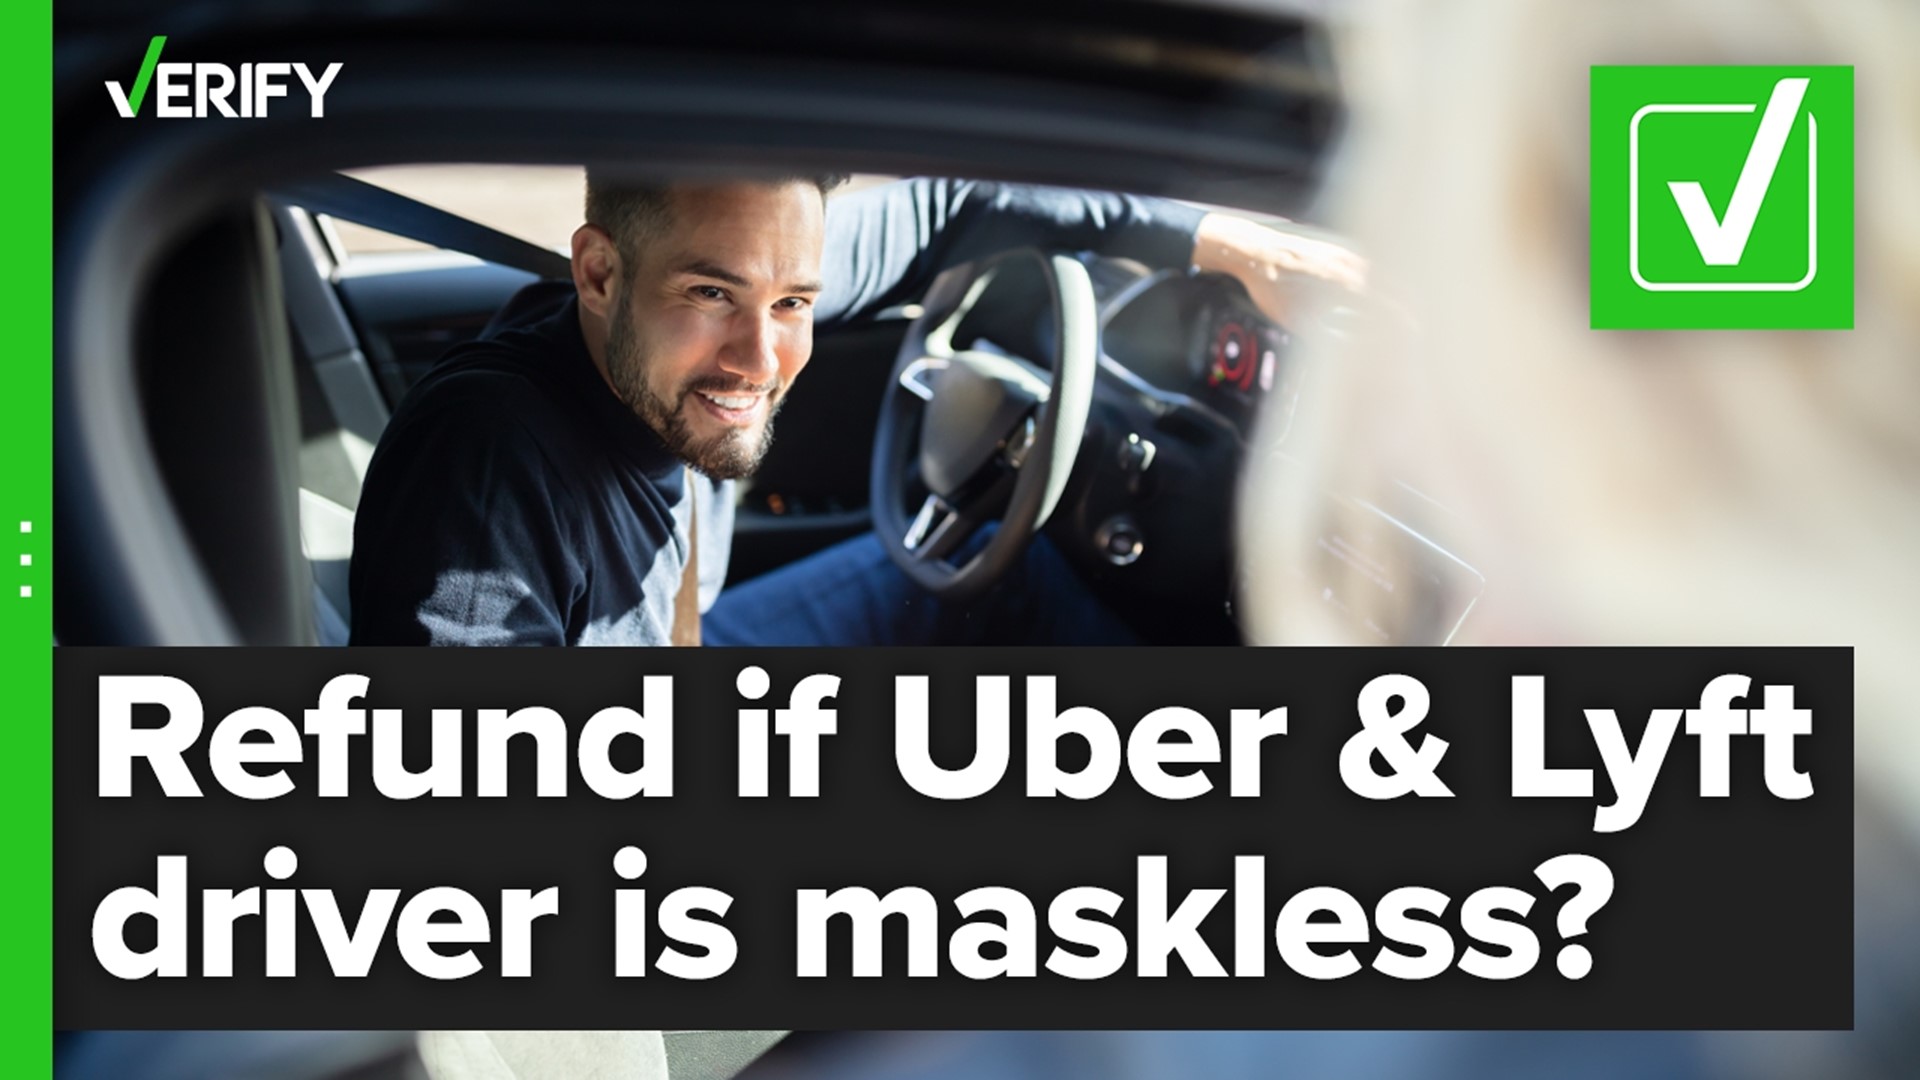 If an Uber or Lyft rider feels unsafe due to the driver not wearing a mask, they can cancel and be refunded for their fee by contacting the companies' support teams.